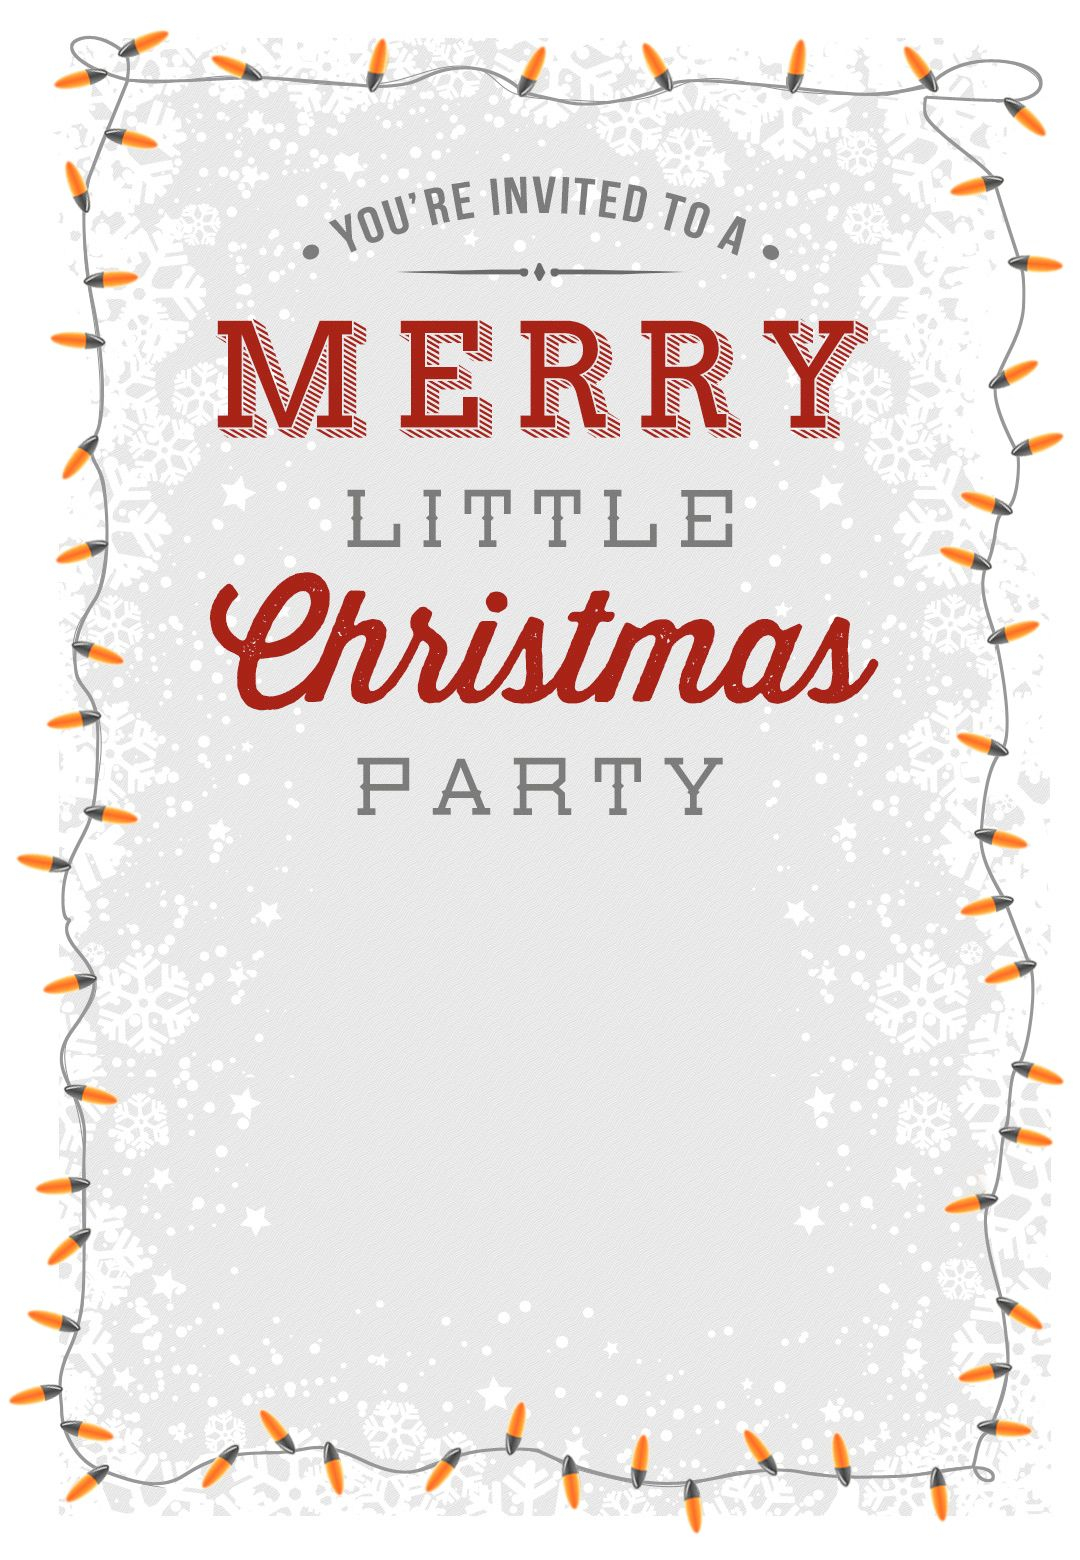 A Merry Little Party Free Printable Christmas Invitation Template pertaining to dimensions 1080 X 1560